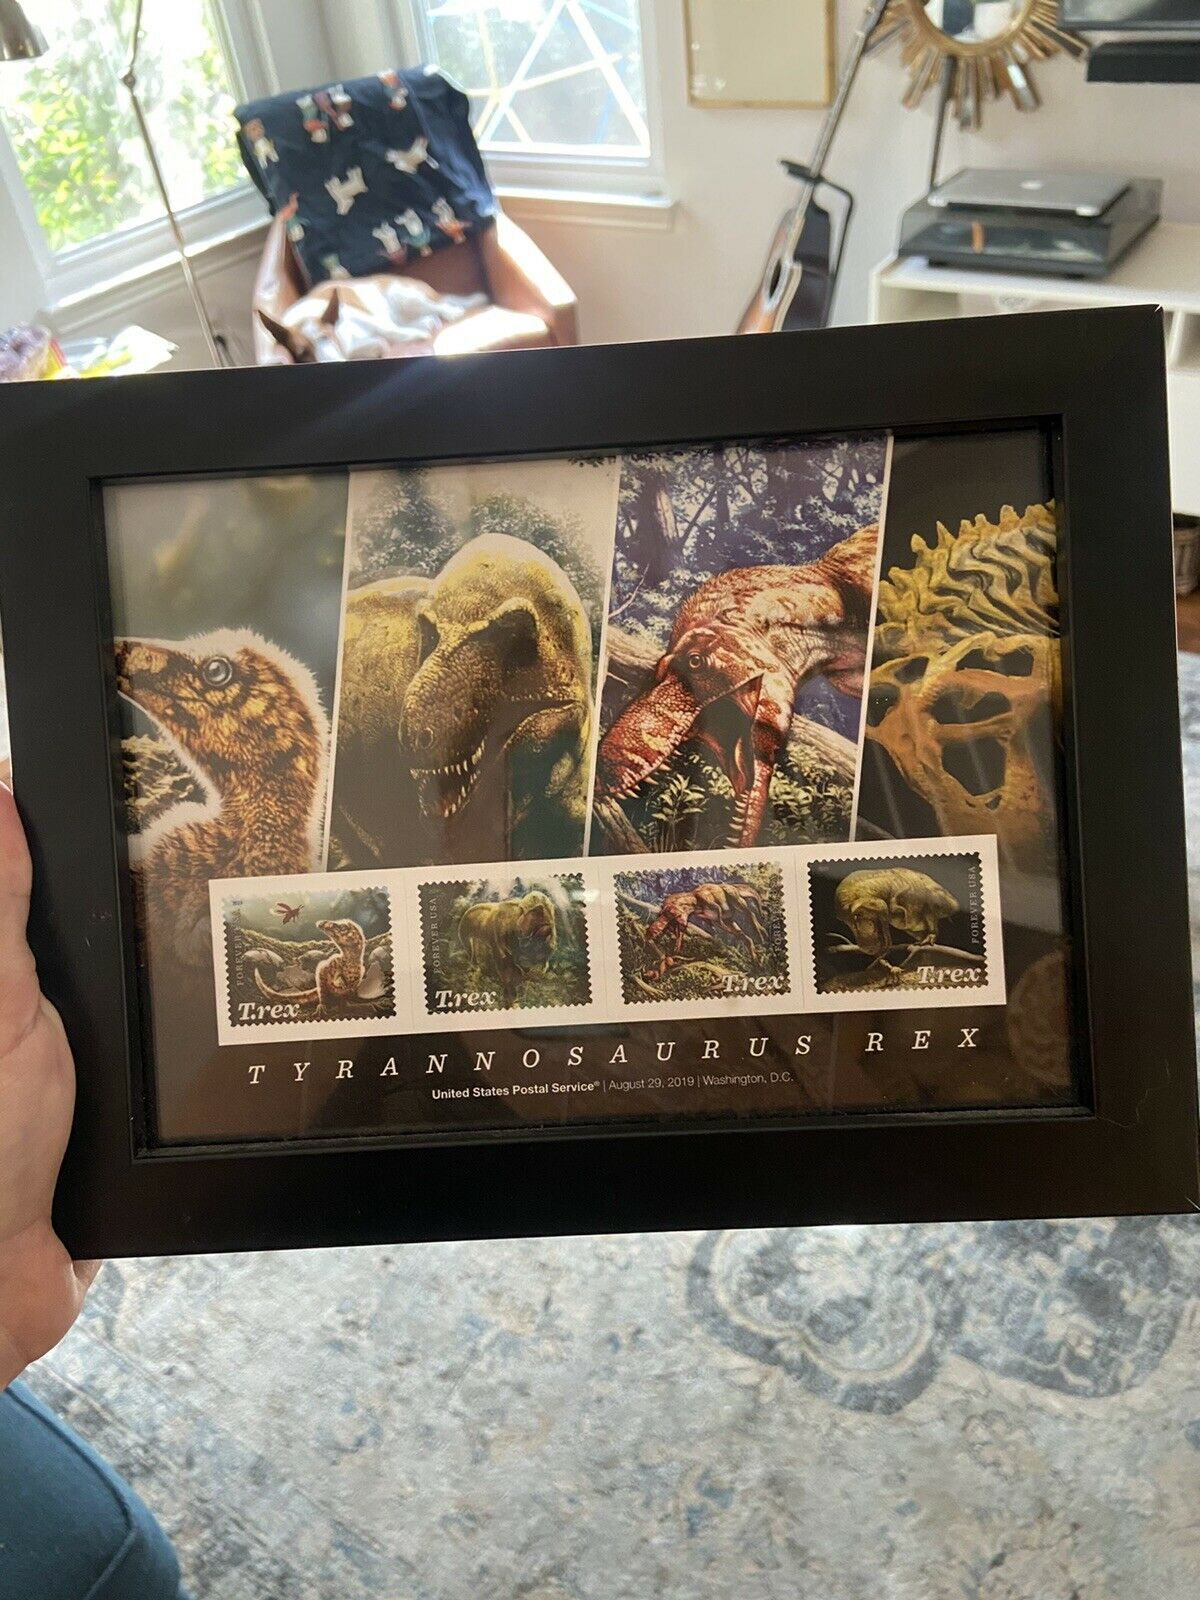 New Usps New Tyrannosaurus Rex Framed Stamps, Retails Now For $29.99